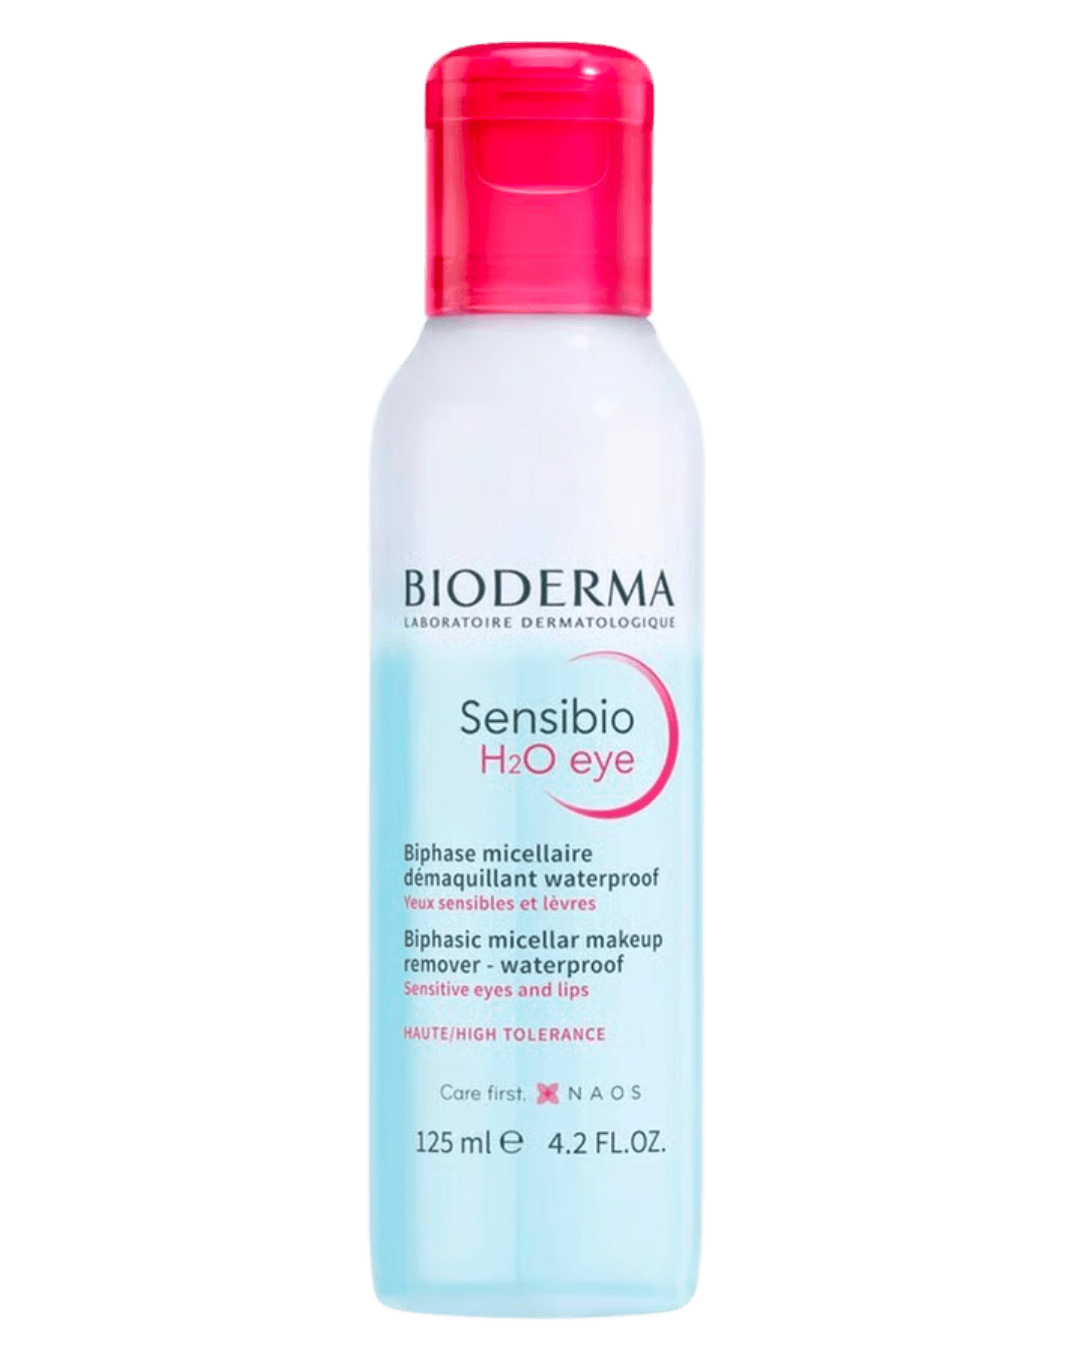 Daily Vanity Beauty Awards 2024 Best  Bioderma Sensibio H2O Eye Voted By Beauty Experts